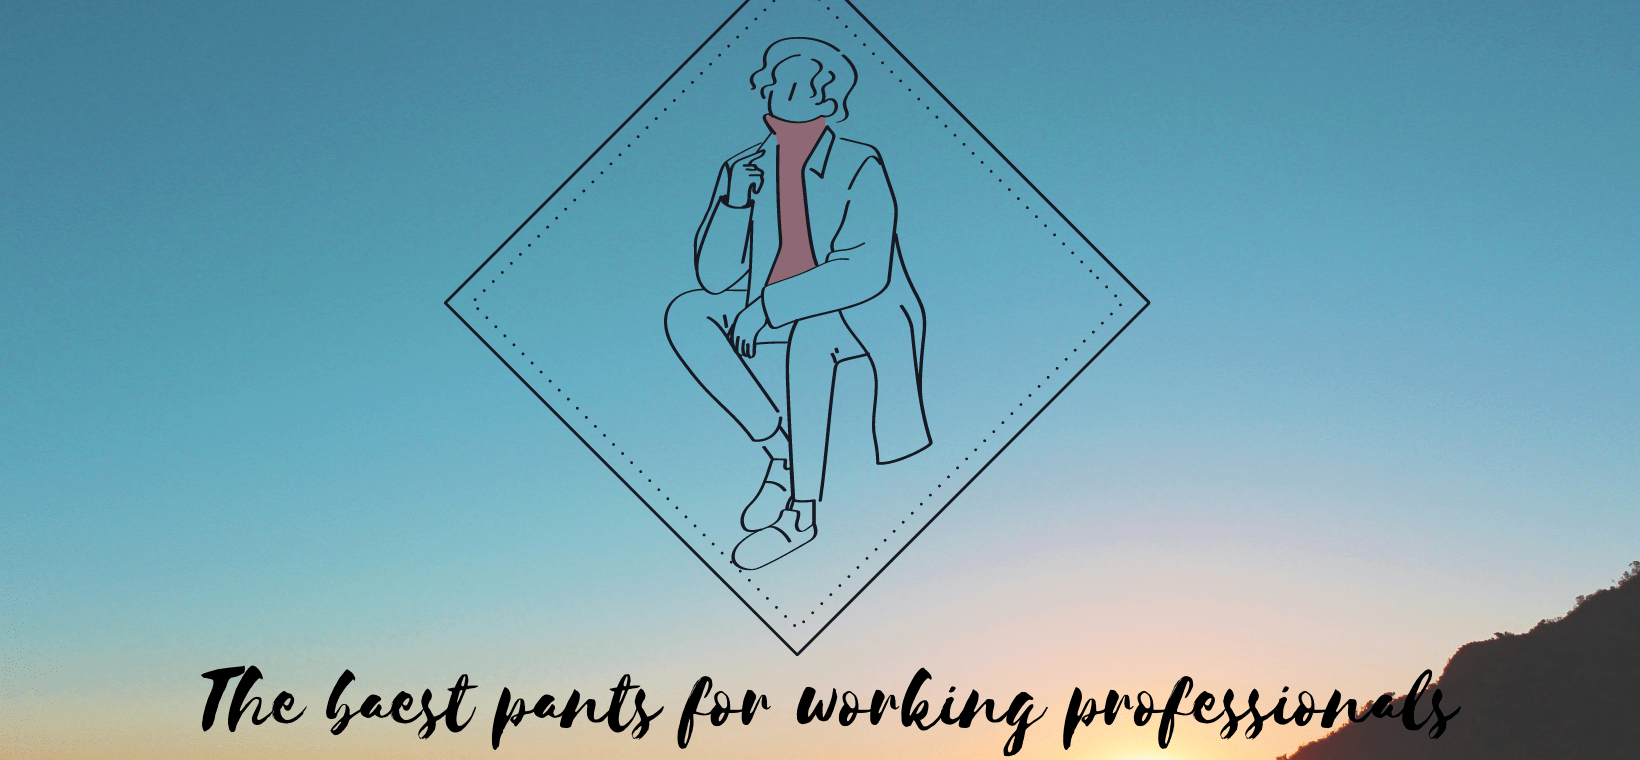 This poster showing the best Pants for working professionals